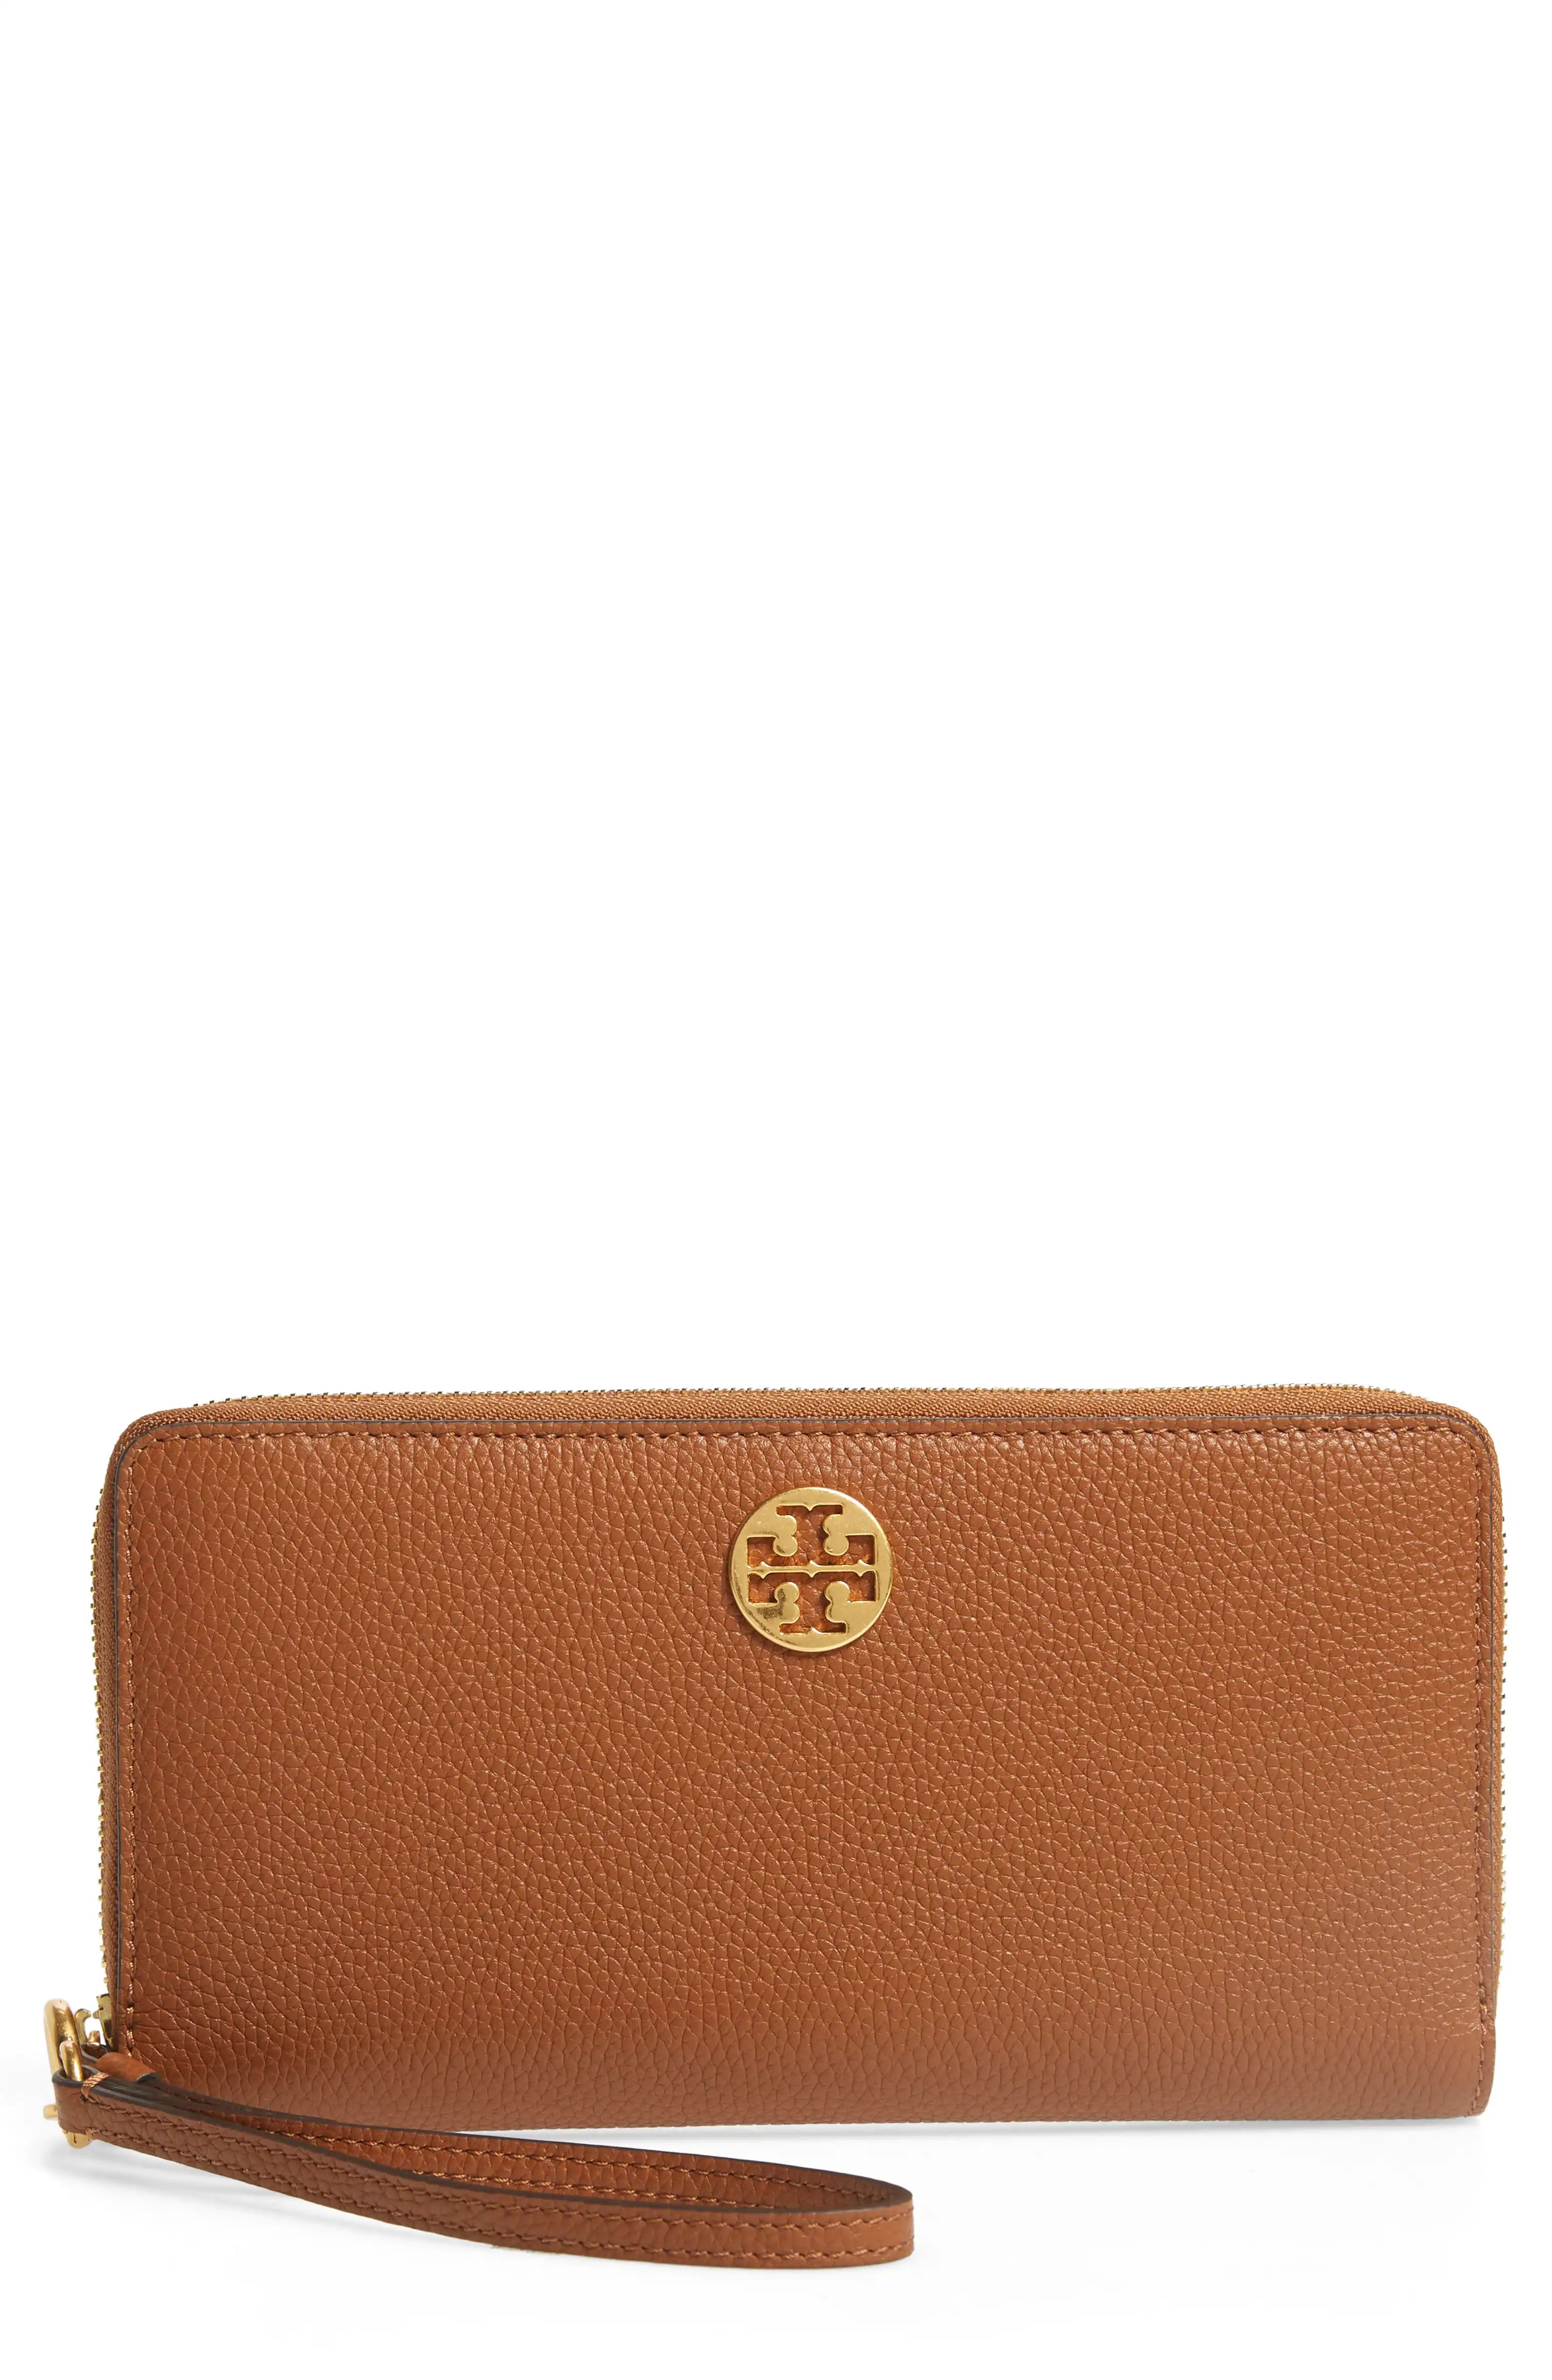 Everly Leather Passport Continental WalletTORY BURCH | Nordstrom